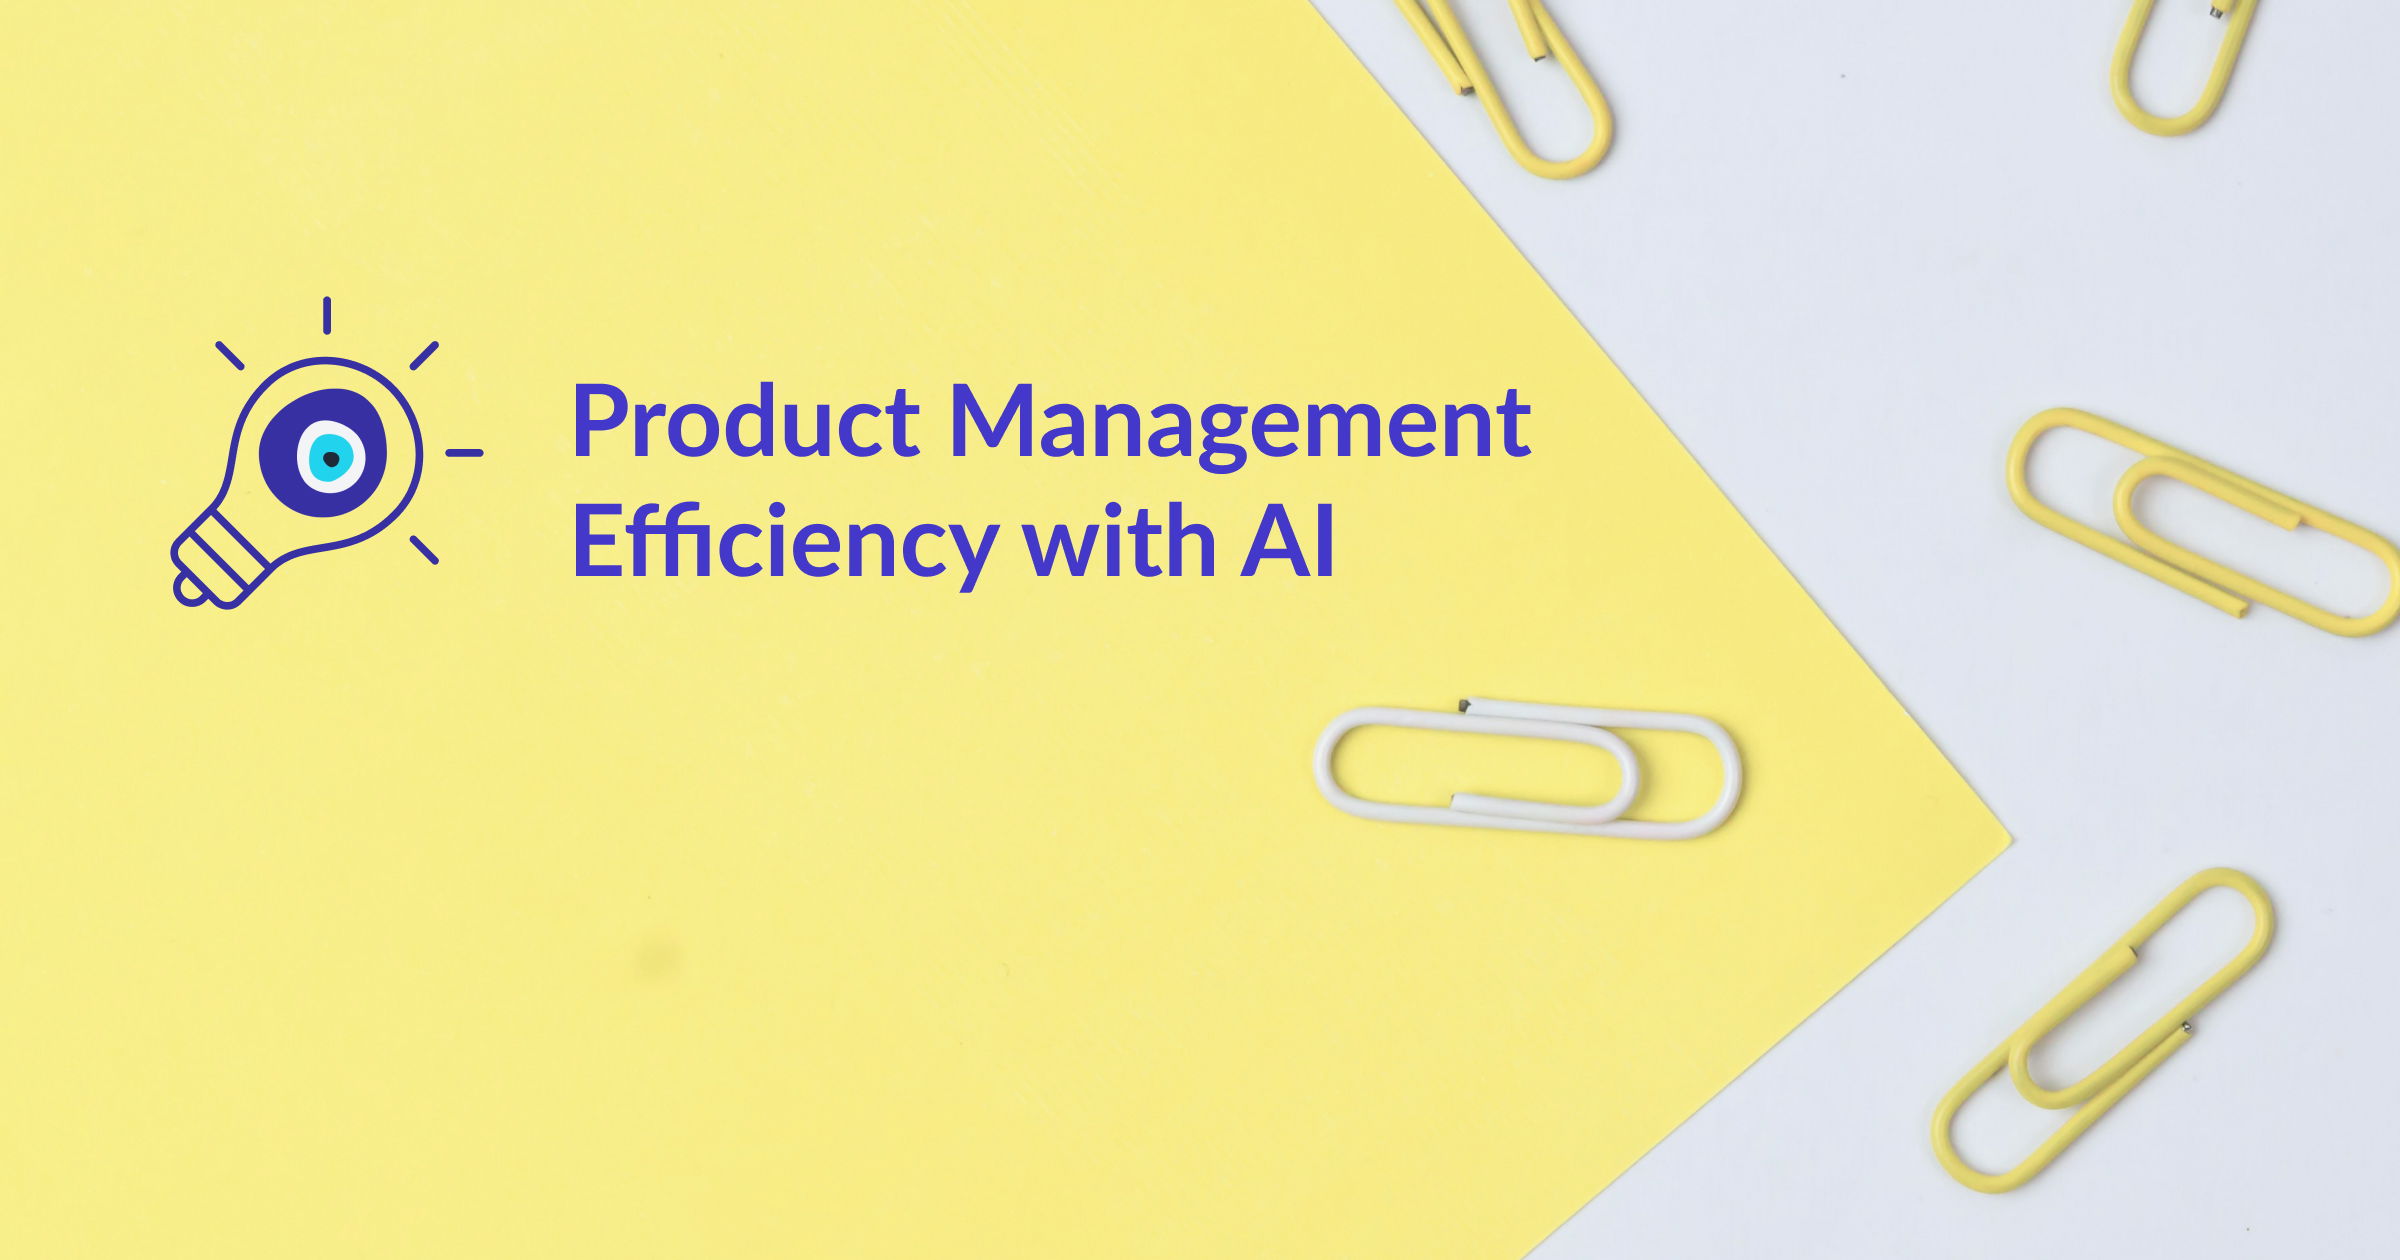 Text saying "Product Management efficiency with AI" and image of a white paper clip and many yellow clips